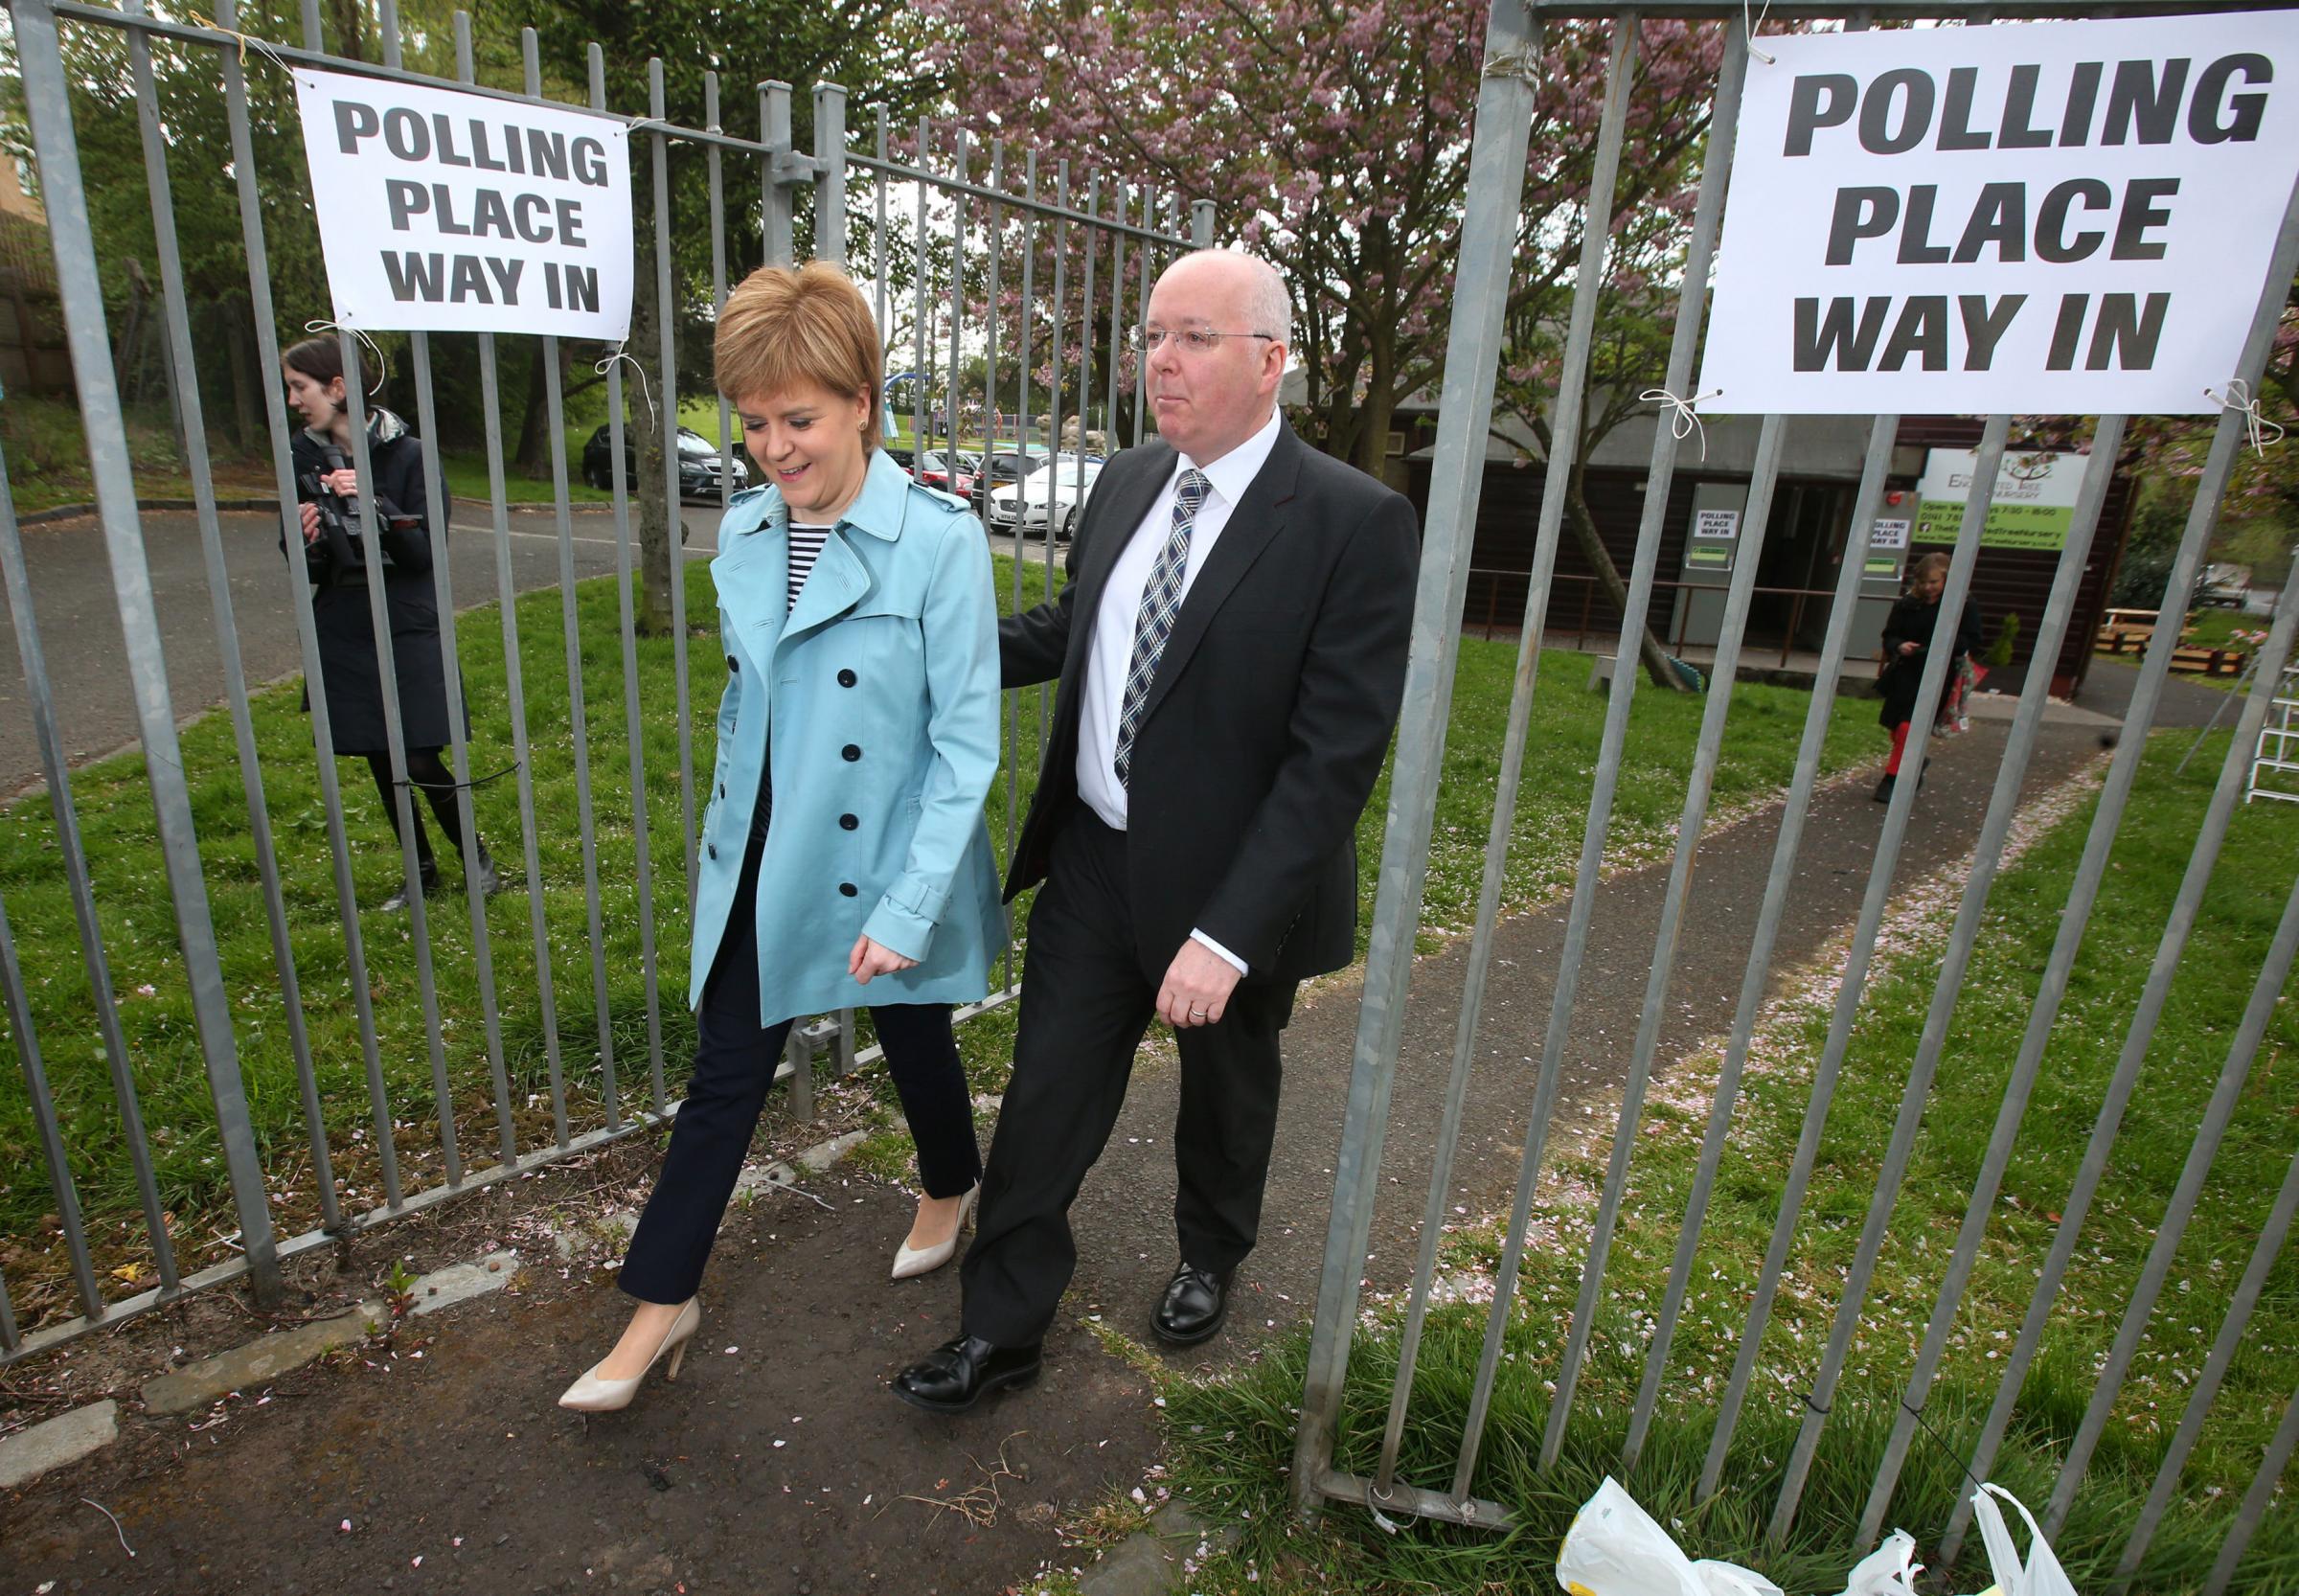 First Minister and SNP Leader Nicola Sturgeon and her husband Peter Murrell outside Broomhouse Community Hall polling station in Glasgow after casting their votes for the local council elections..